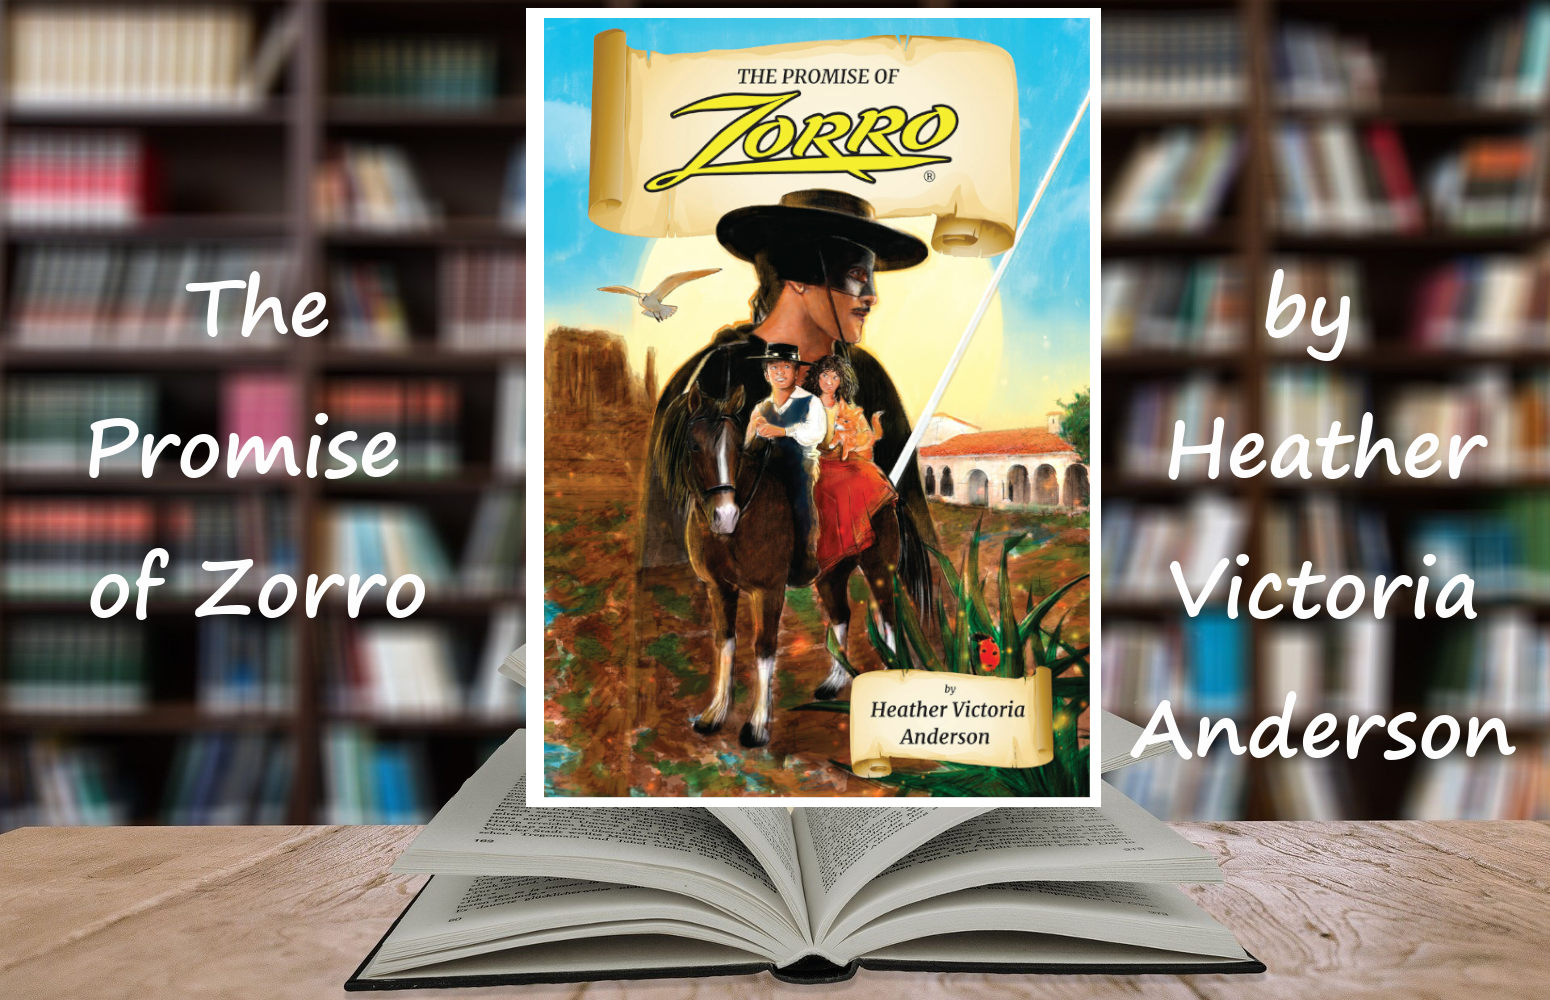 The Promise of Zorro by Heather Victoria Anderson